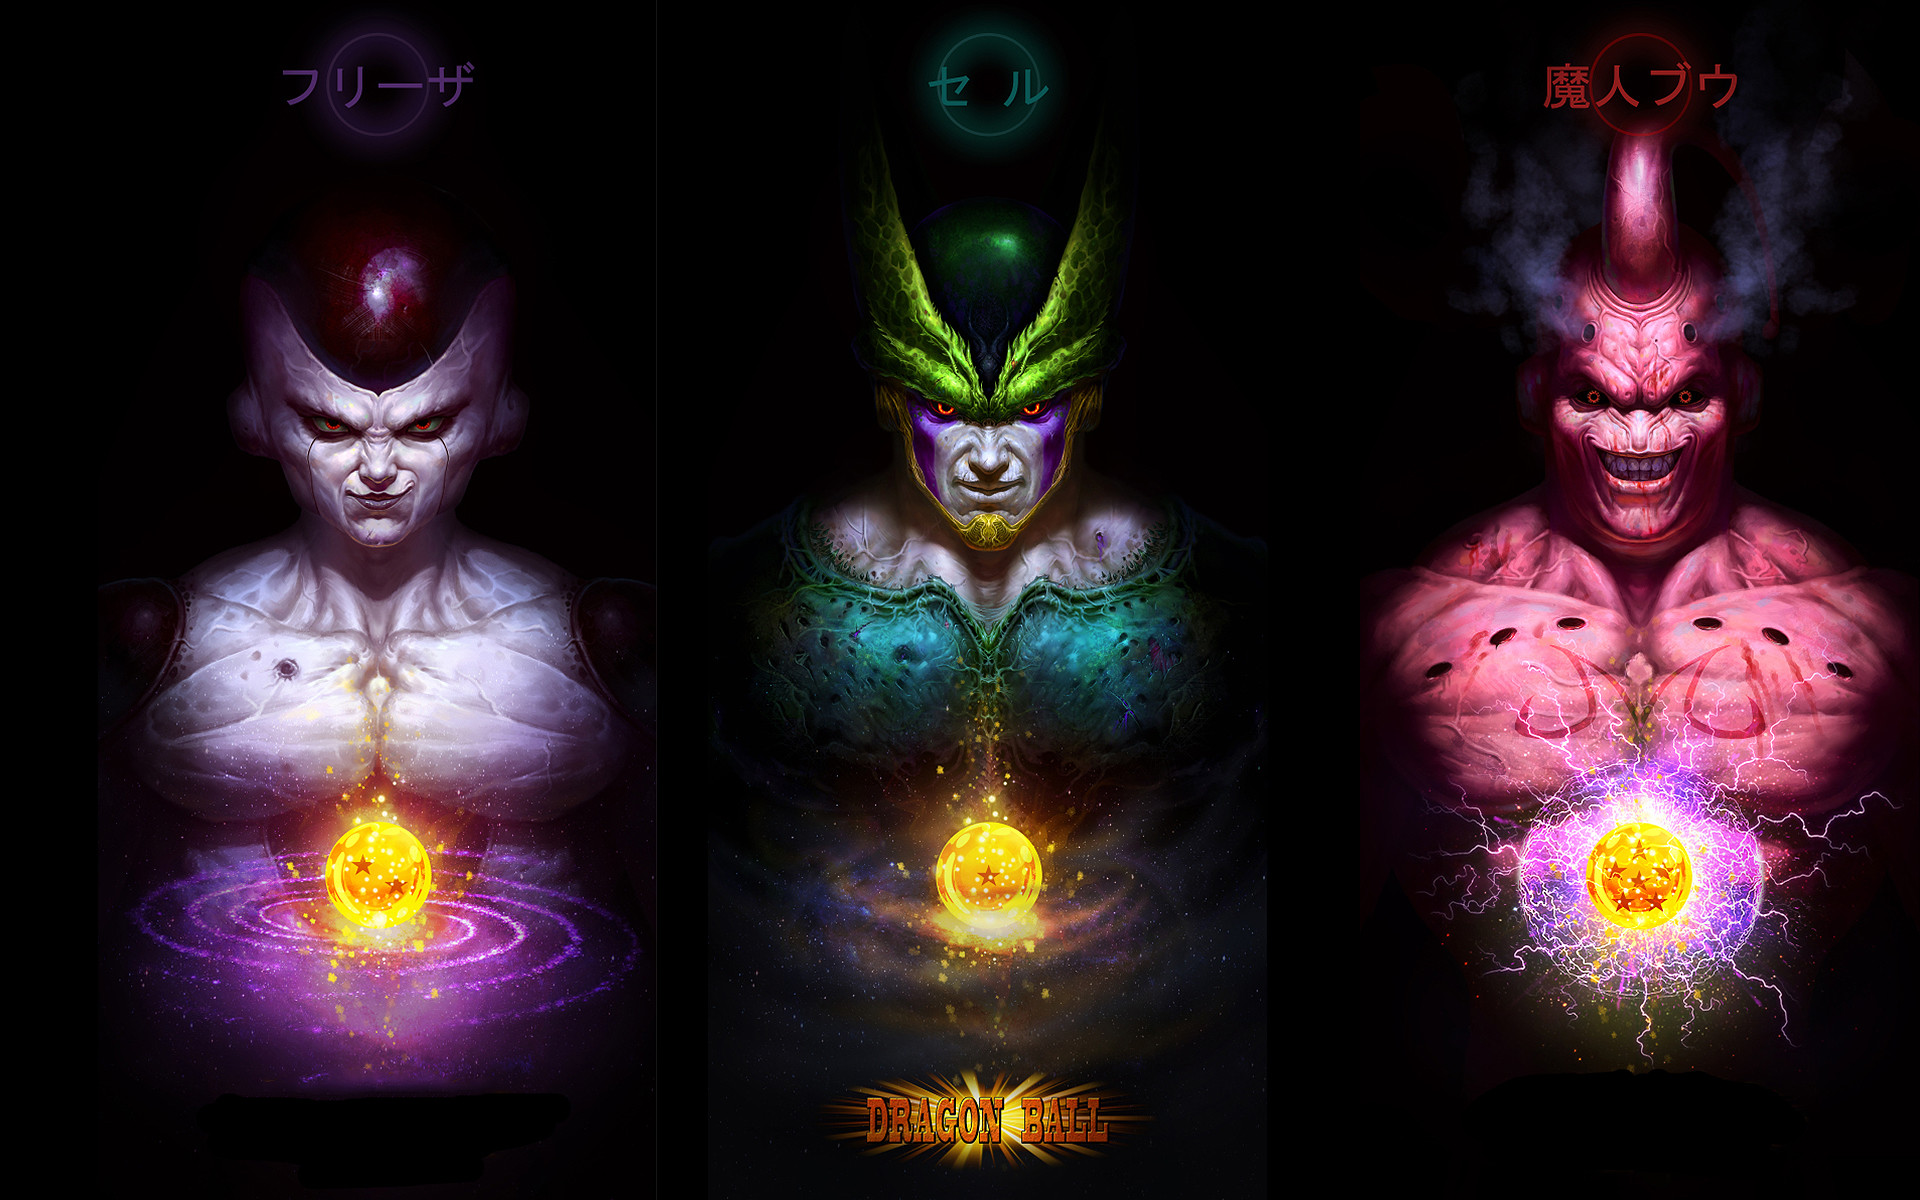 Cell Dbz Wallpapers ·① Wallpapertag